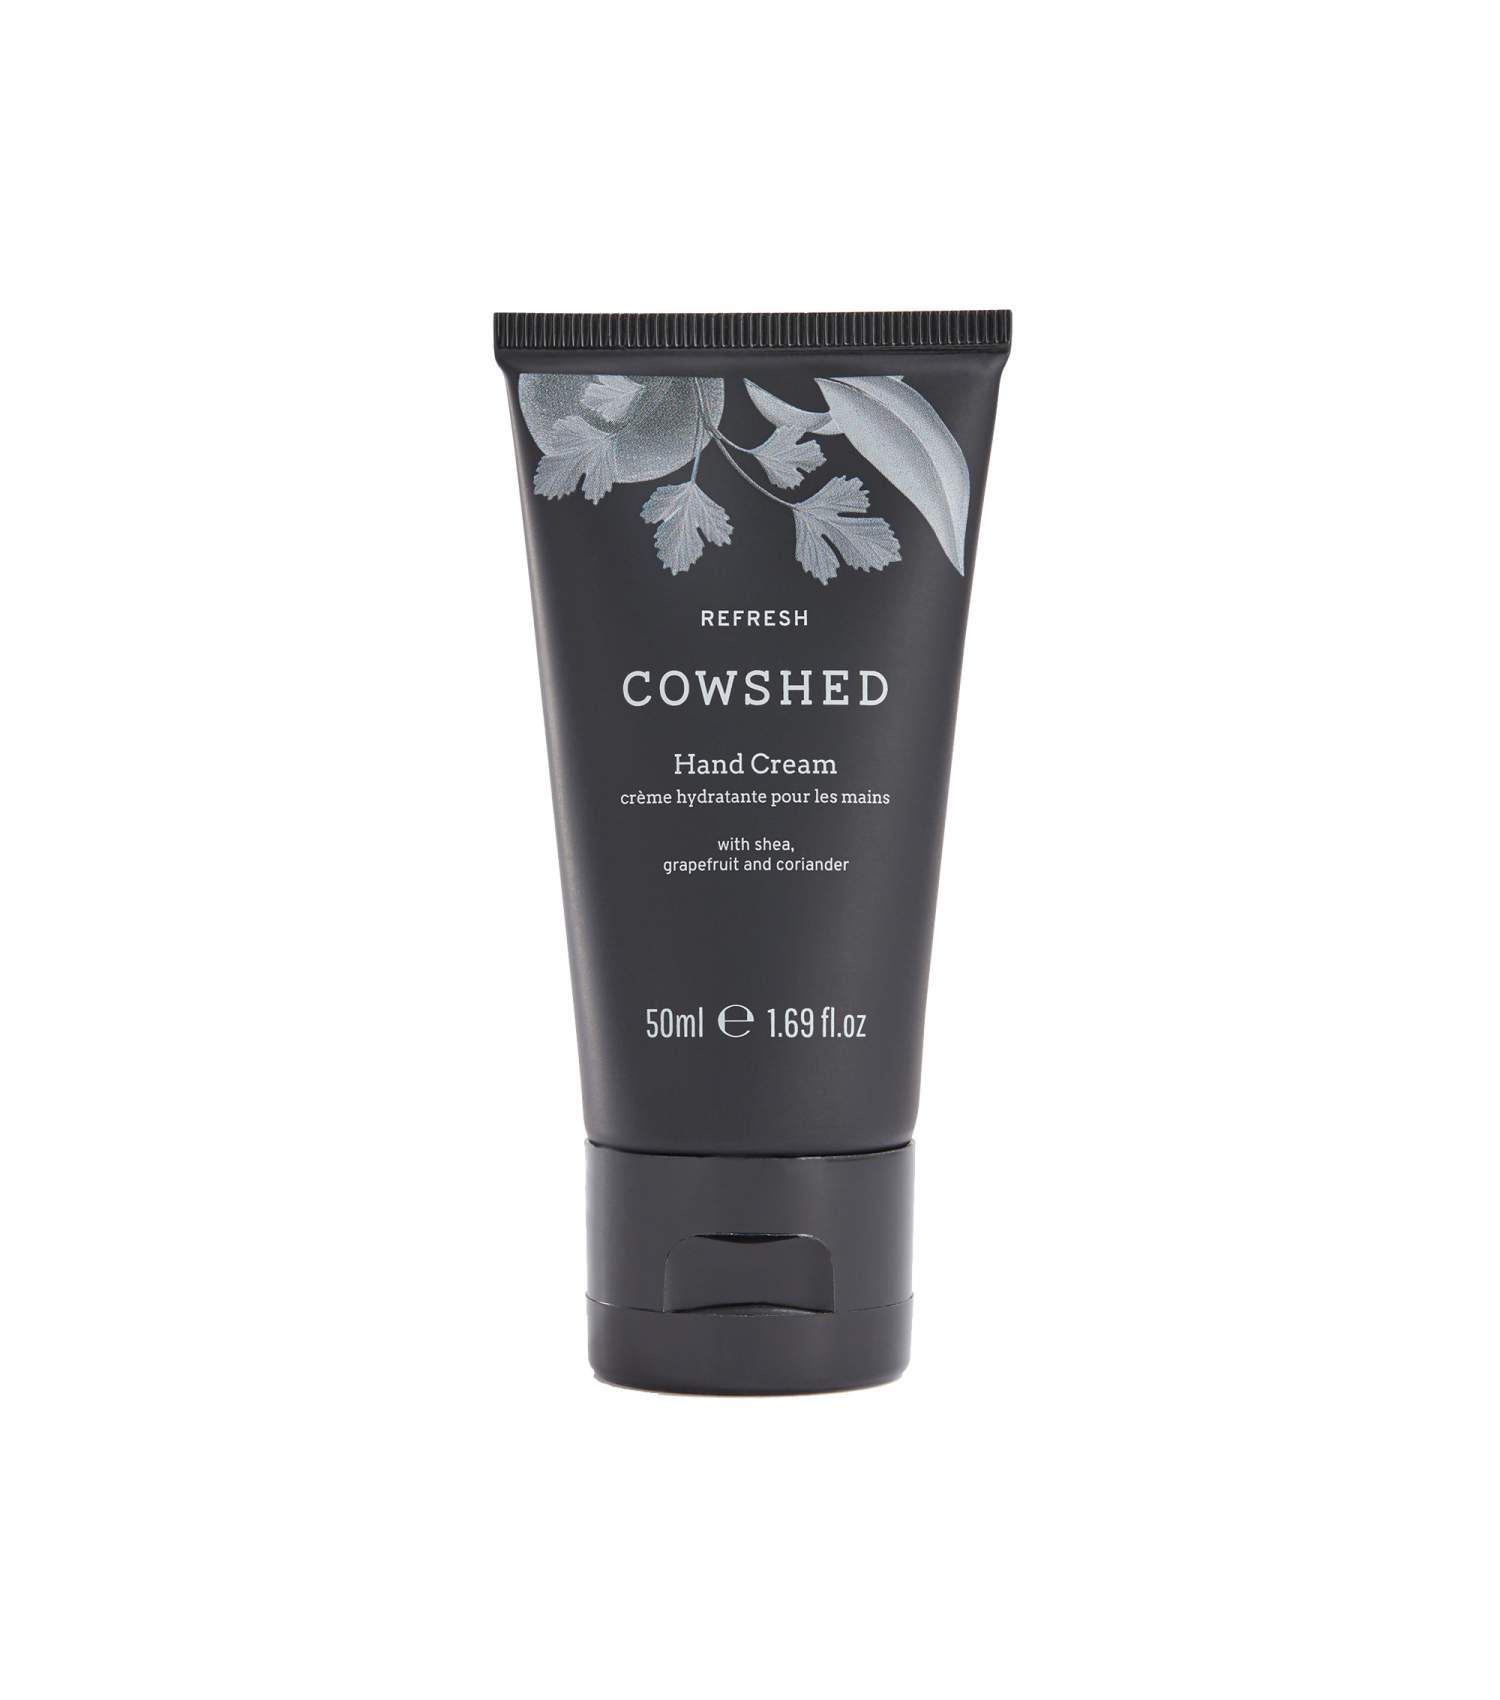 COWSHED Refresh Hand Cream COWSHED Refresh Hand Cream 1